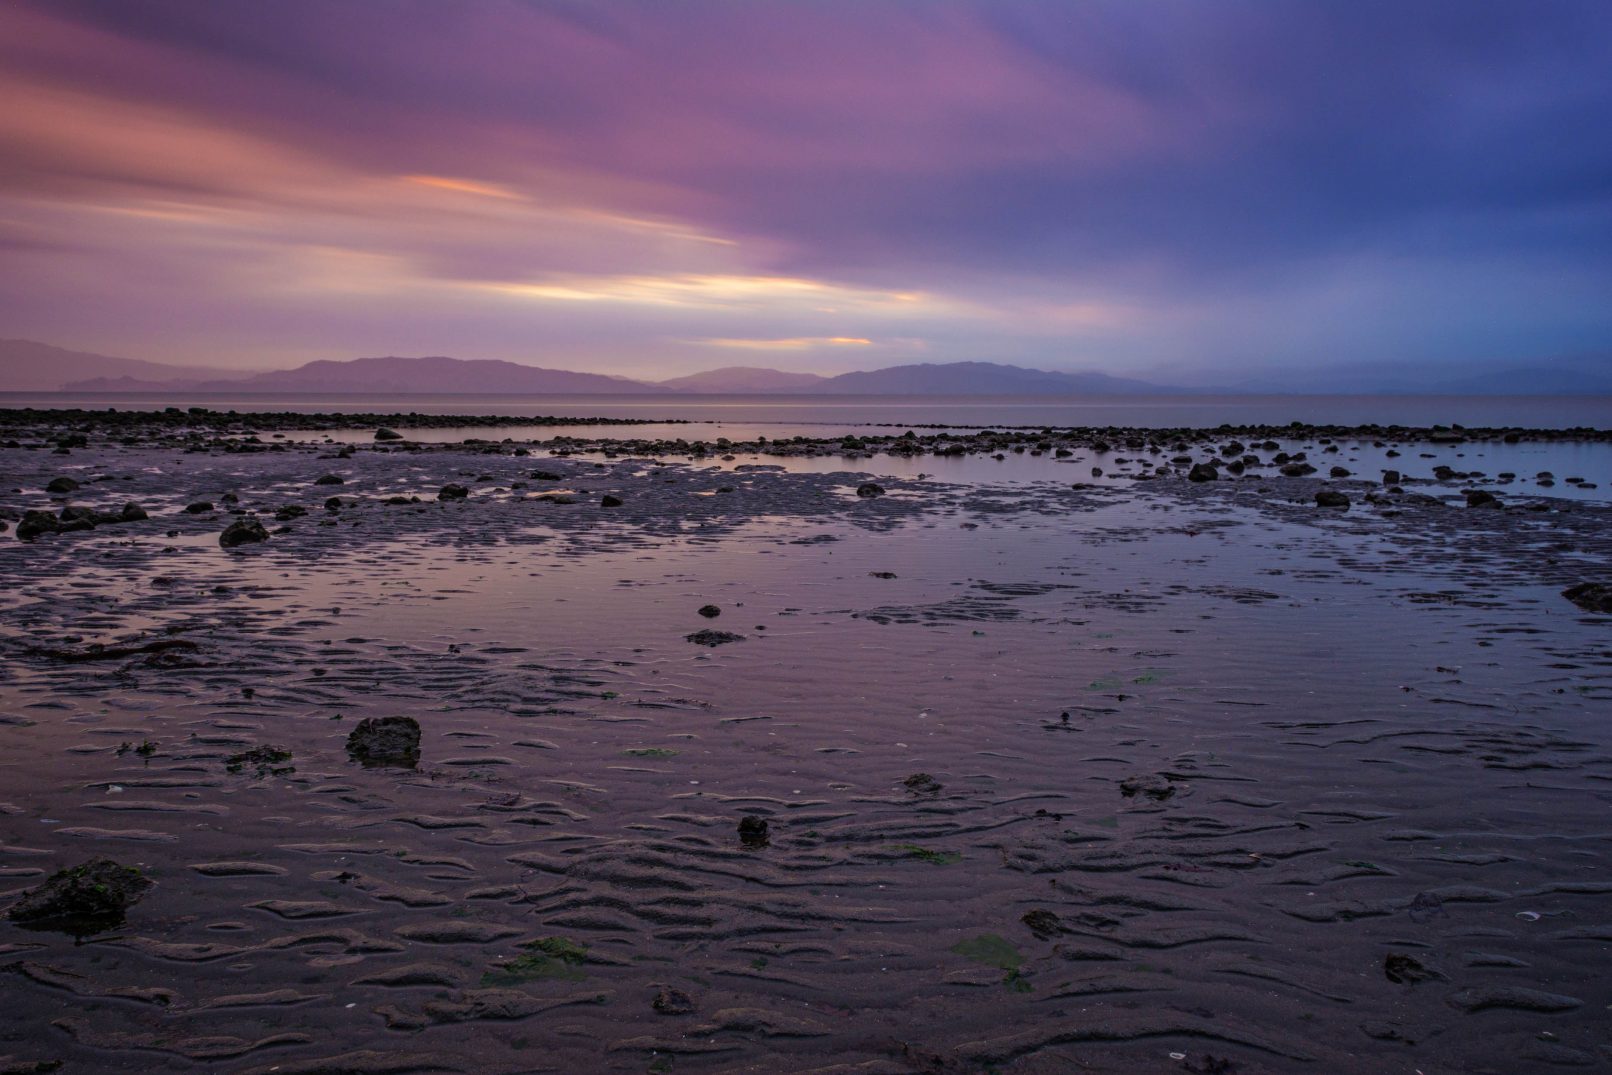 San Pablo Bay from Point Pinole with rocks and dramatic, lavender clouds